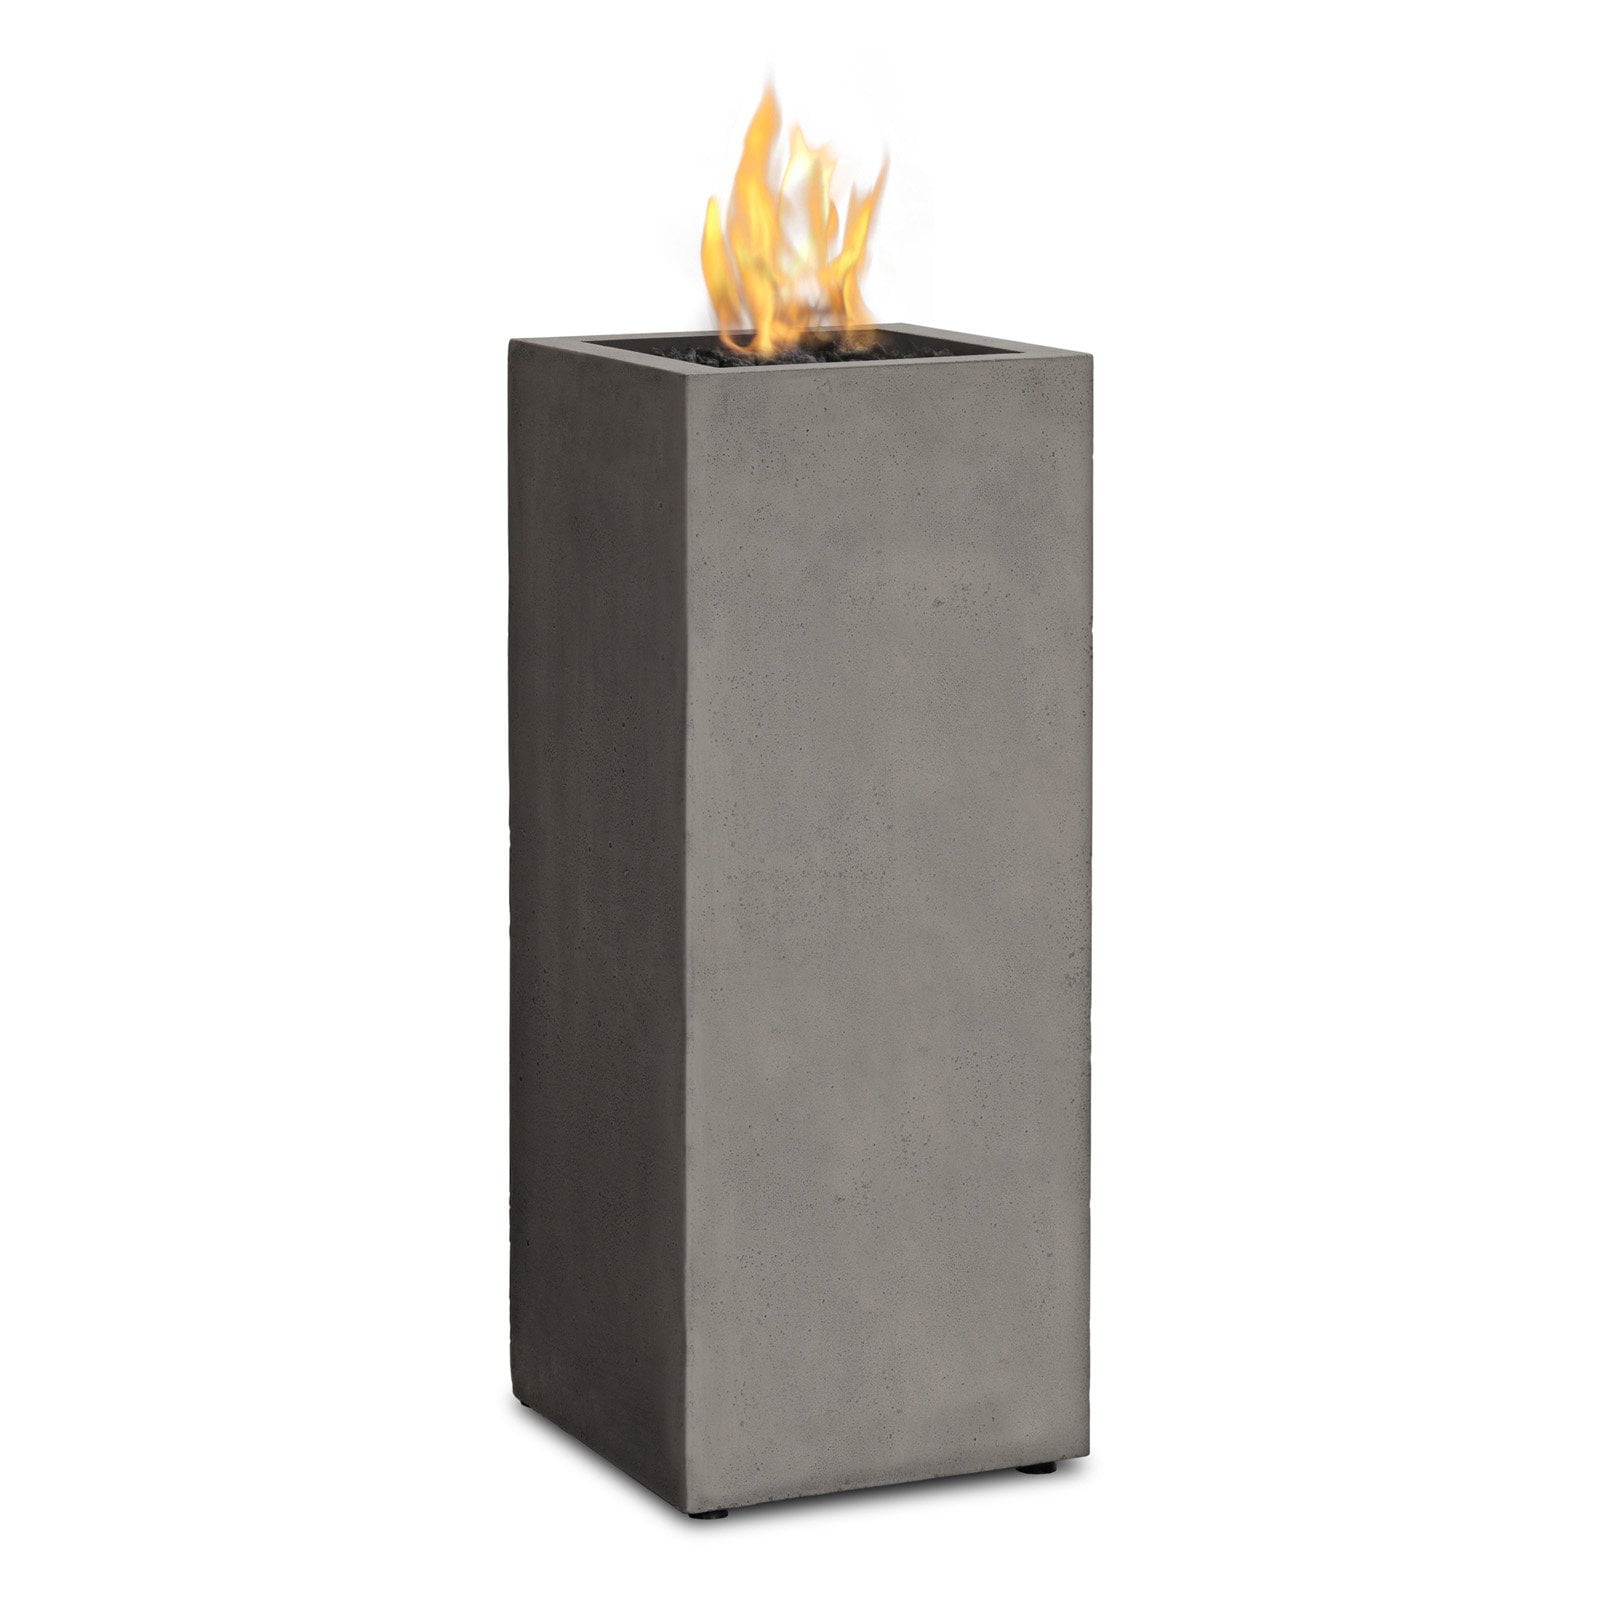 Real Flame Baltic Propane Fire Column, Real Flame Baltic Fire Pit